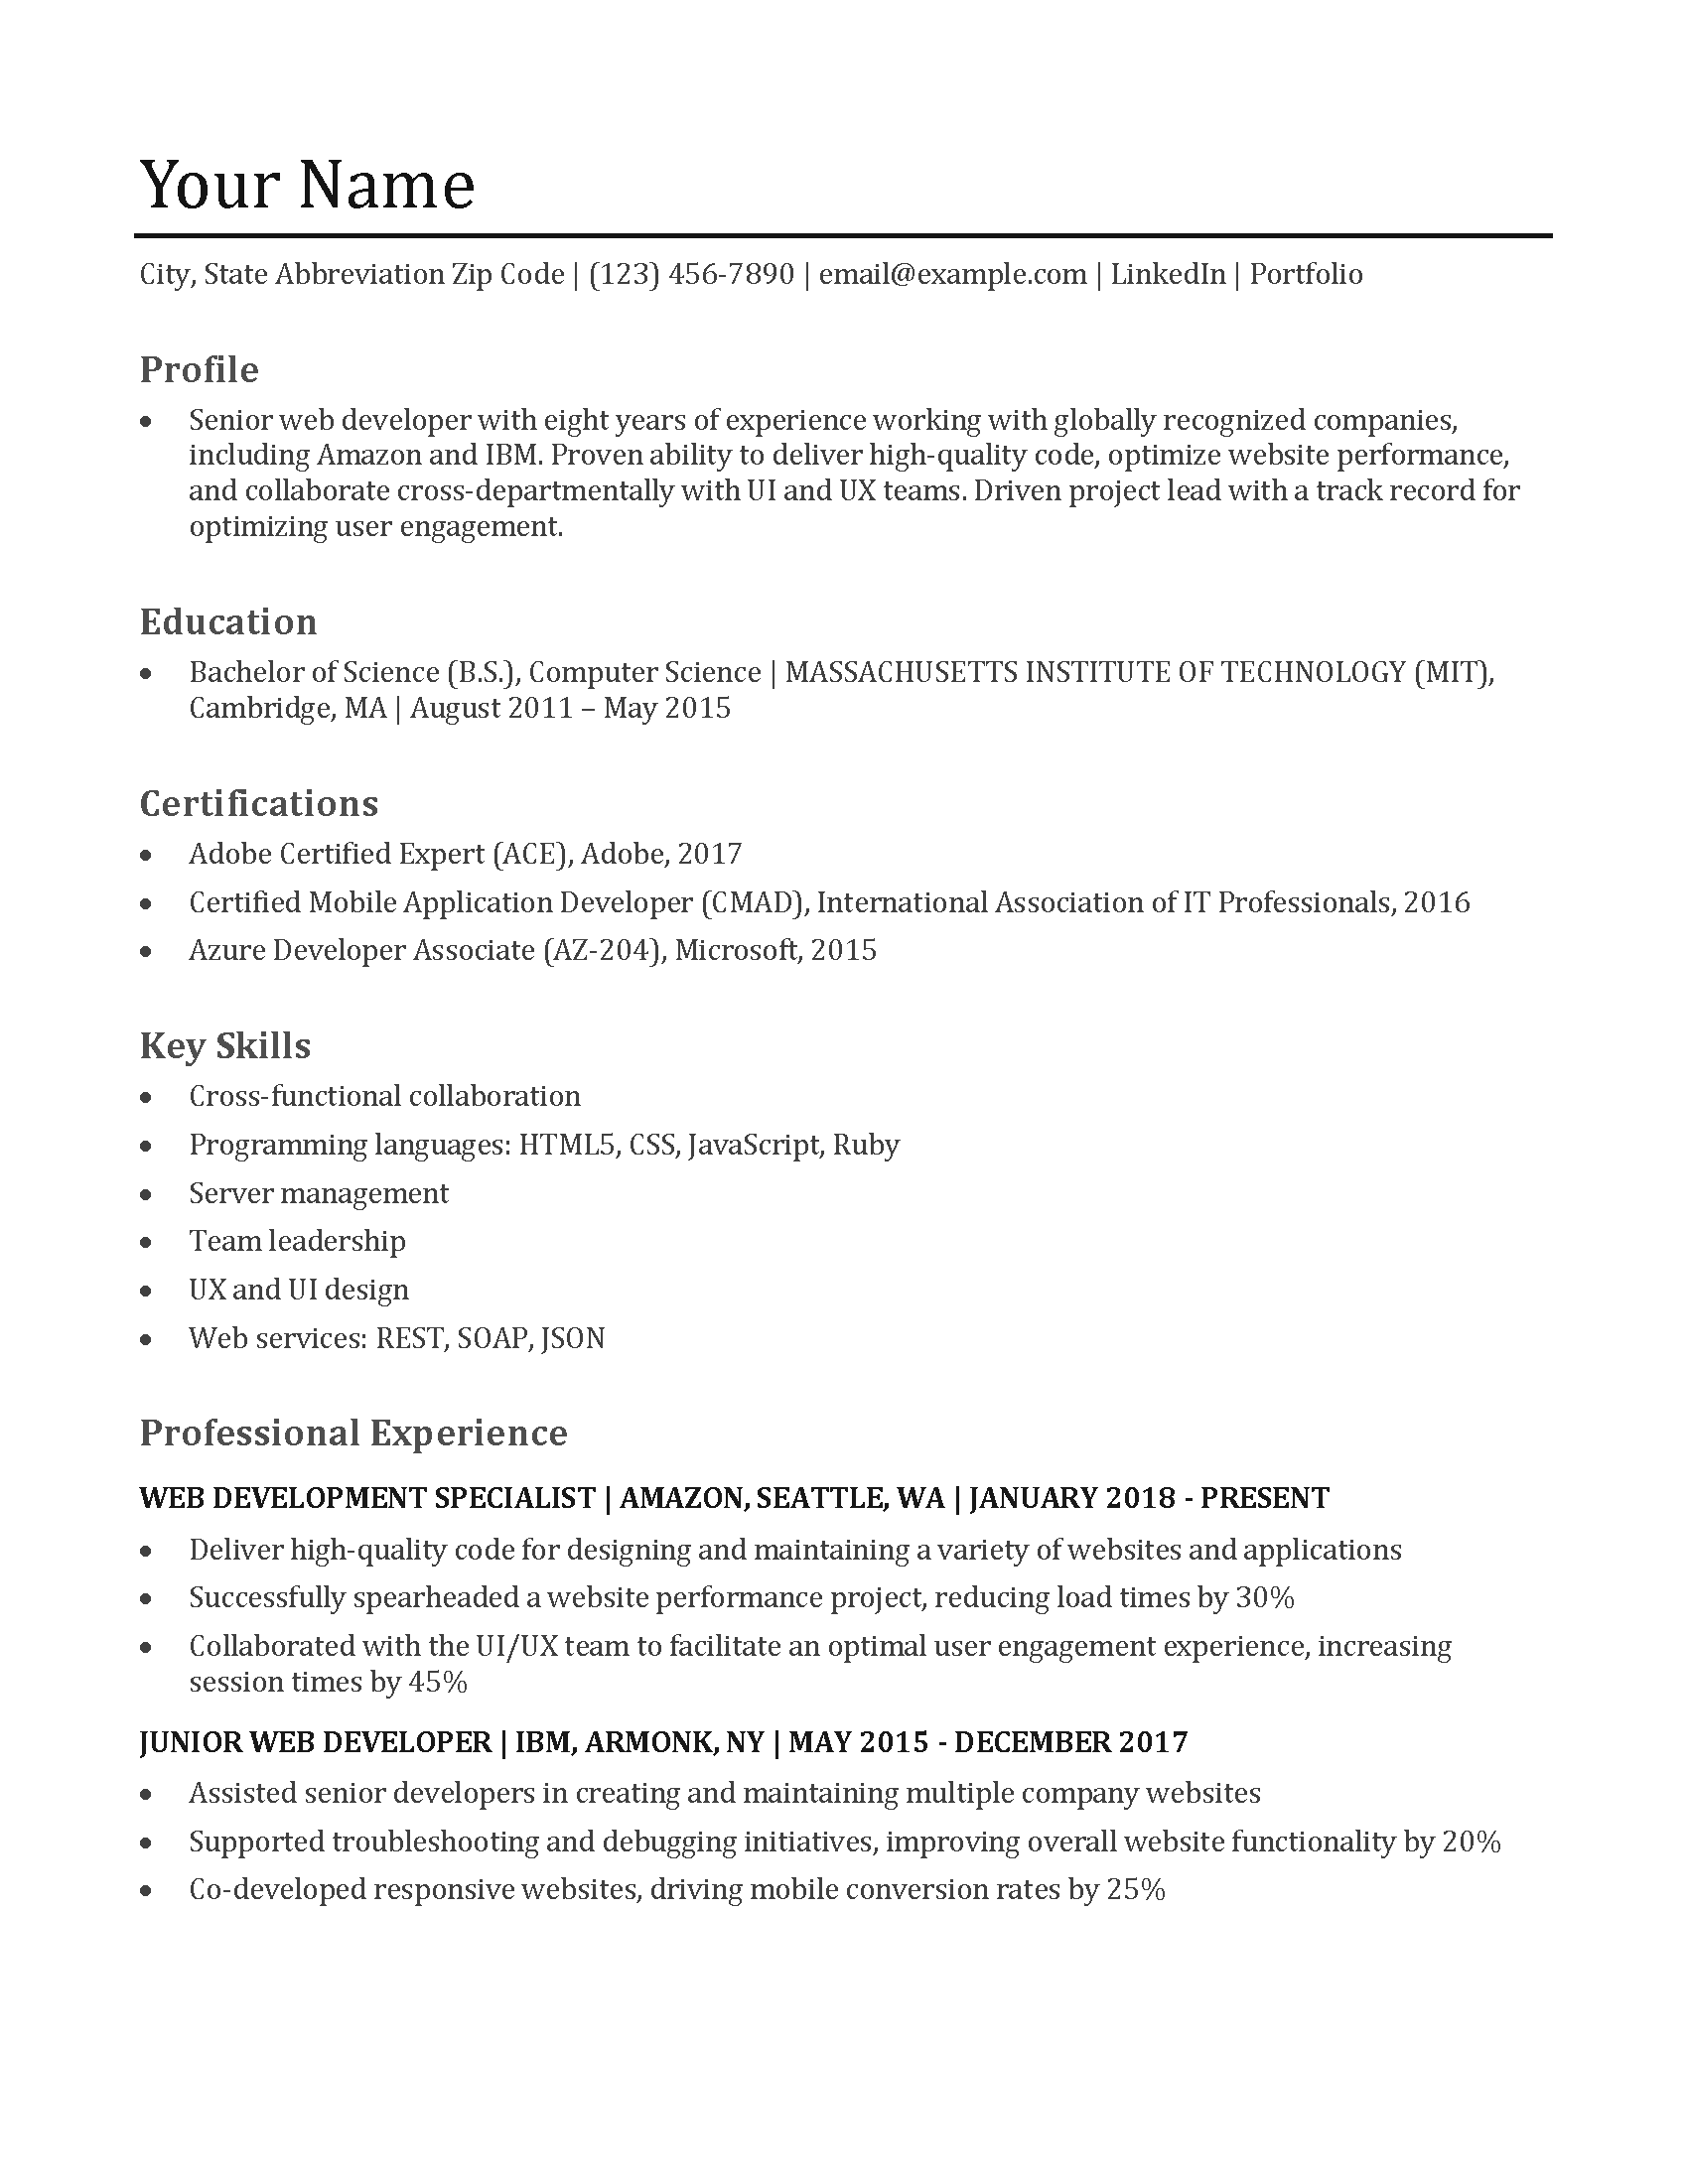 Web Developer Resume Templates and Examples